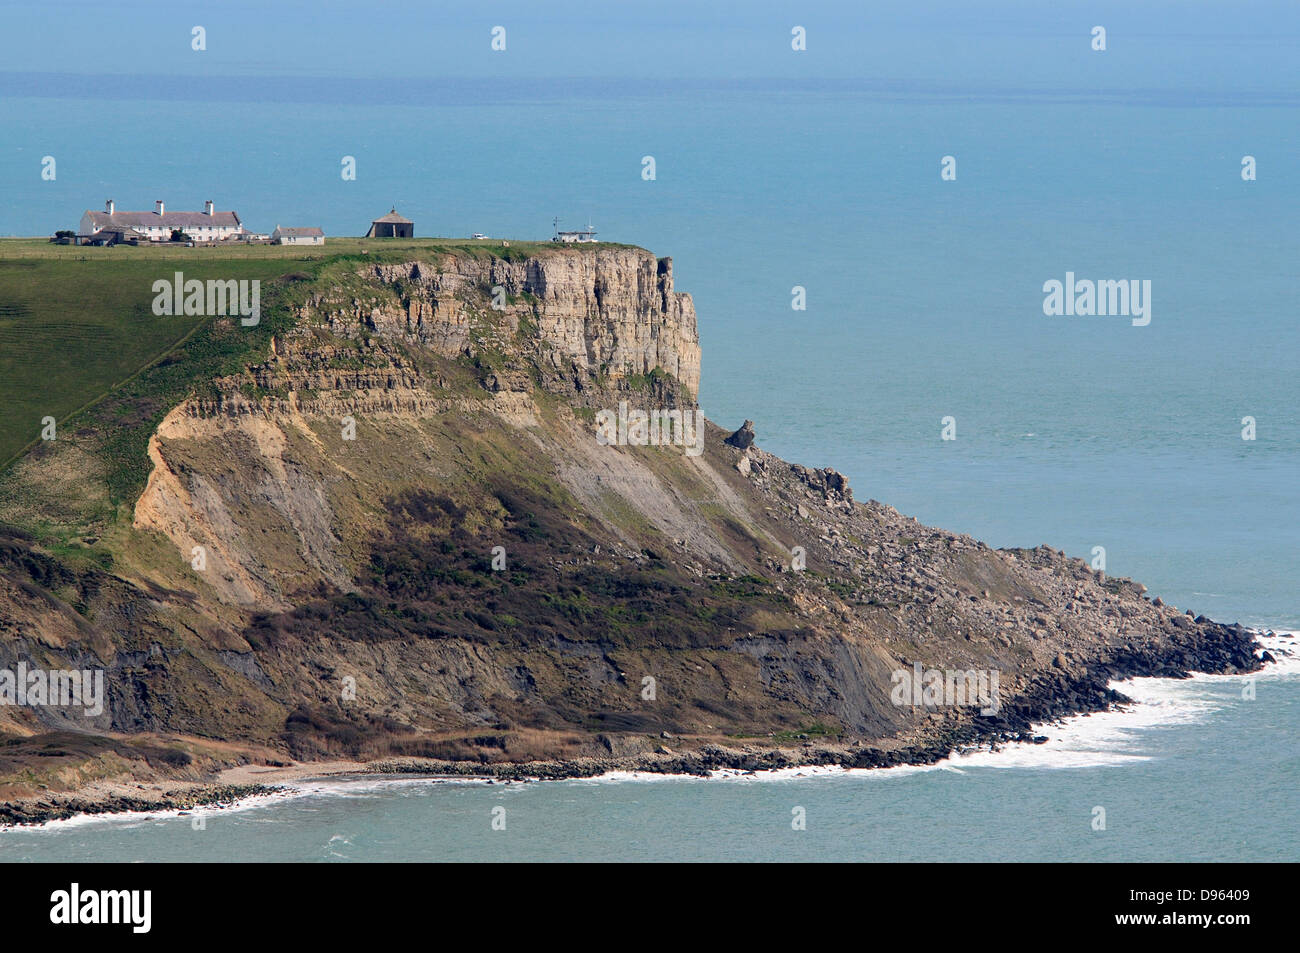 A view of St. Aldhelm's Head on the Dorset coast Stock Photo